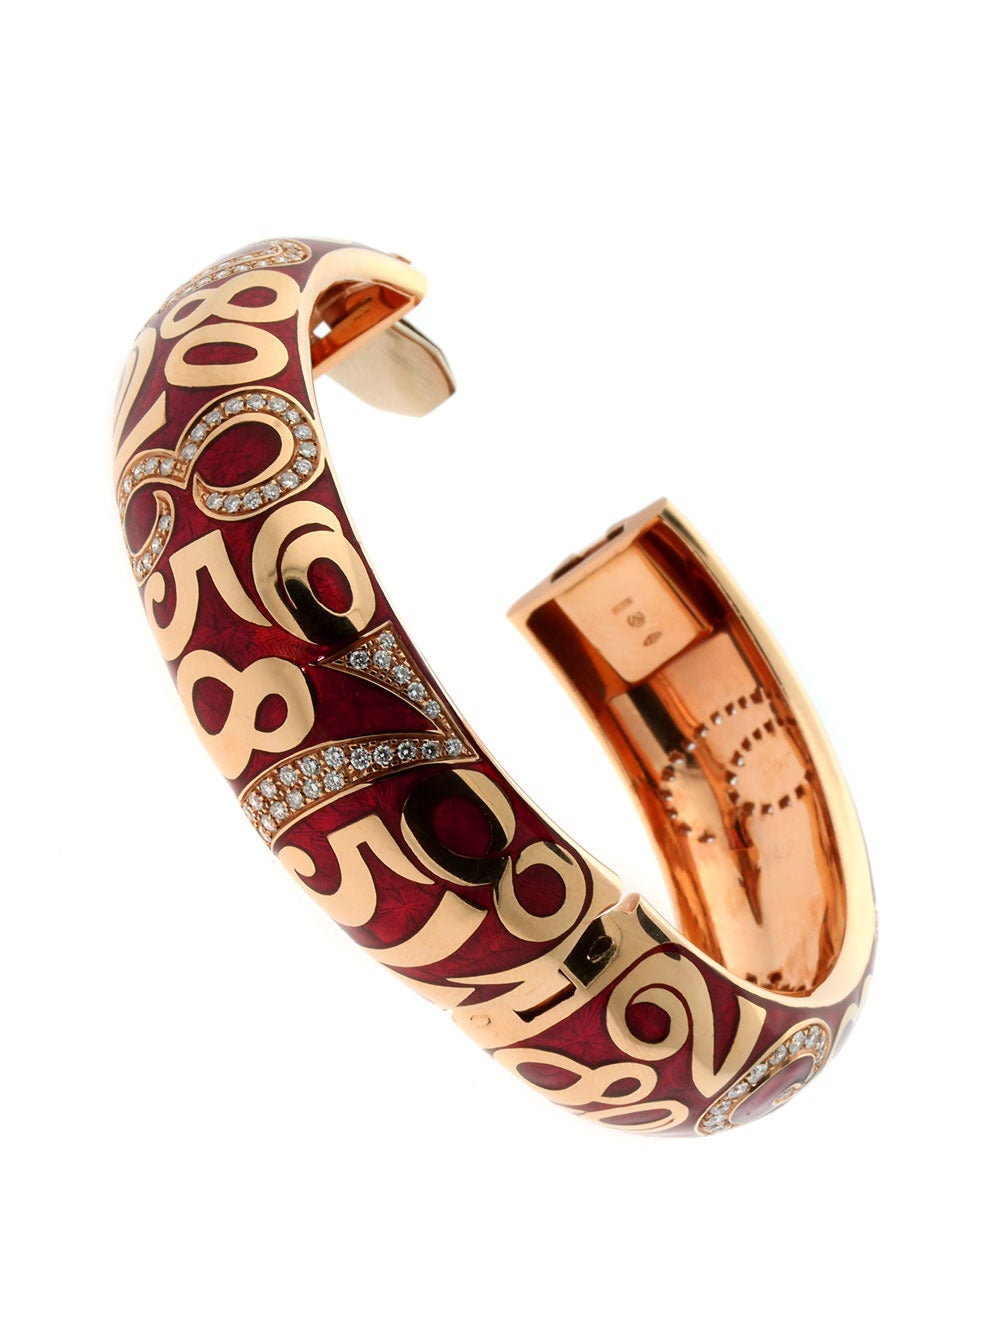 An incredible Franck Muller Crazy Hours bangle bracelet in 18k rose gold adorned by the finest Franck Muller round brilliant cut diamonds. The bracelet is laced with a beautiful red enamel to accentuate the rose gold.

Width: .70″ Inches